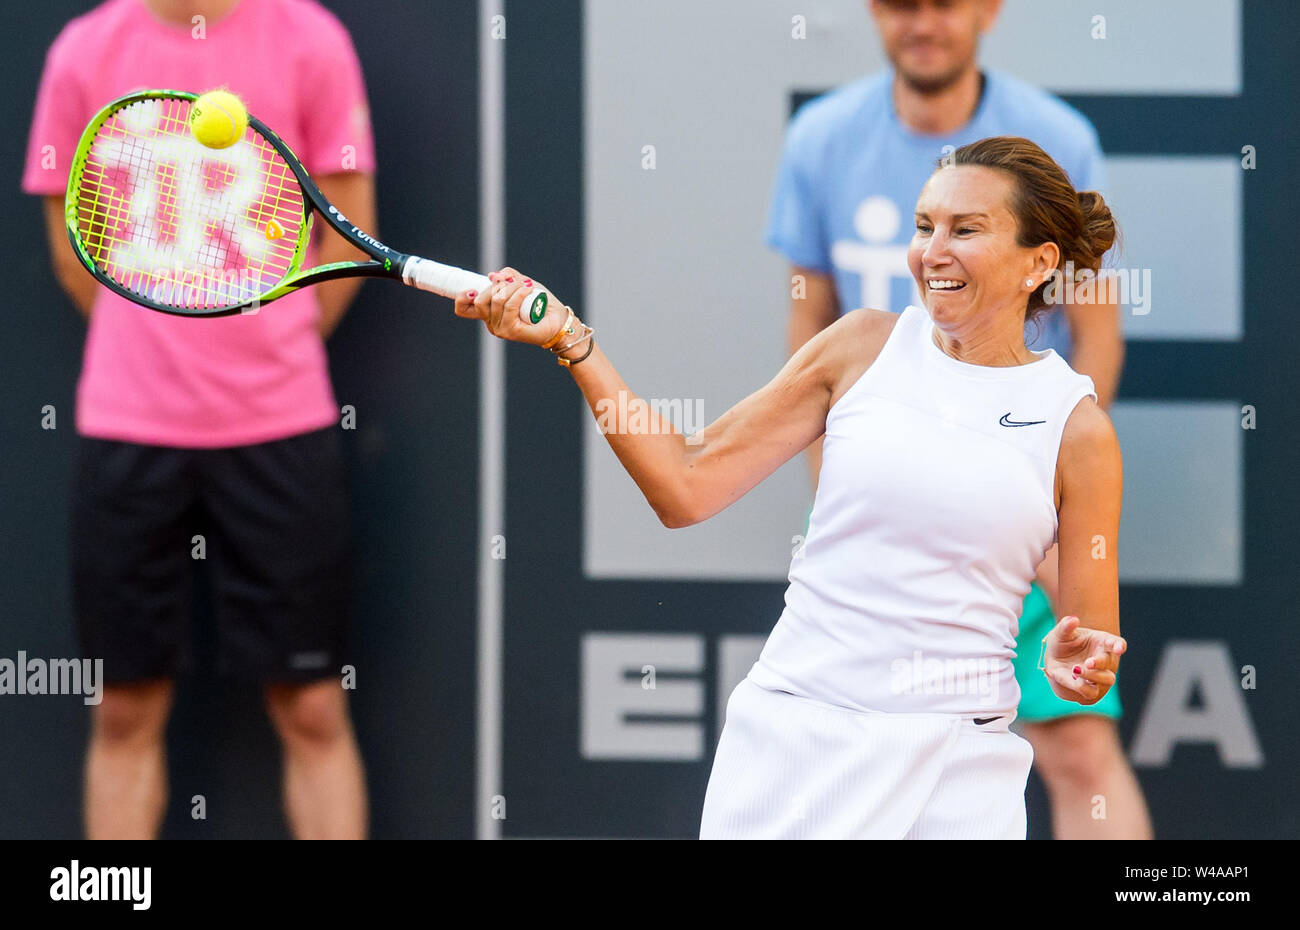 Hamburg, Germany. 21st July, 2019. Tennis, Hamburg European Open at the  Rothenbaum stadium, show match: Iva Majoli from Croatia and Massu from  Chile play against Schett-Eagle from Austria and Zverev from Germany.